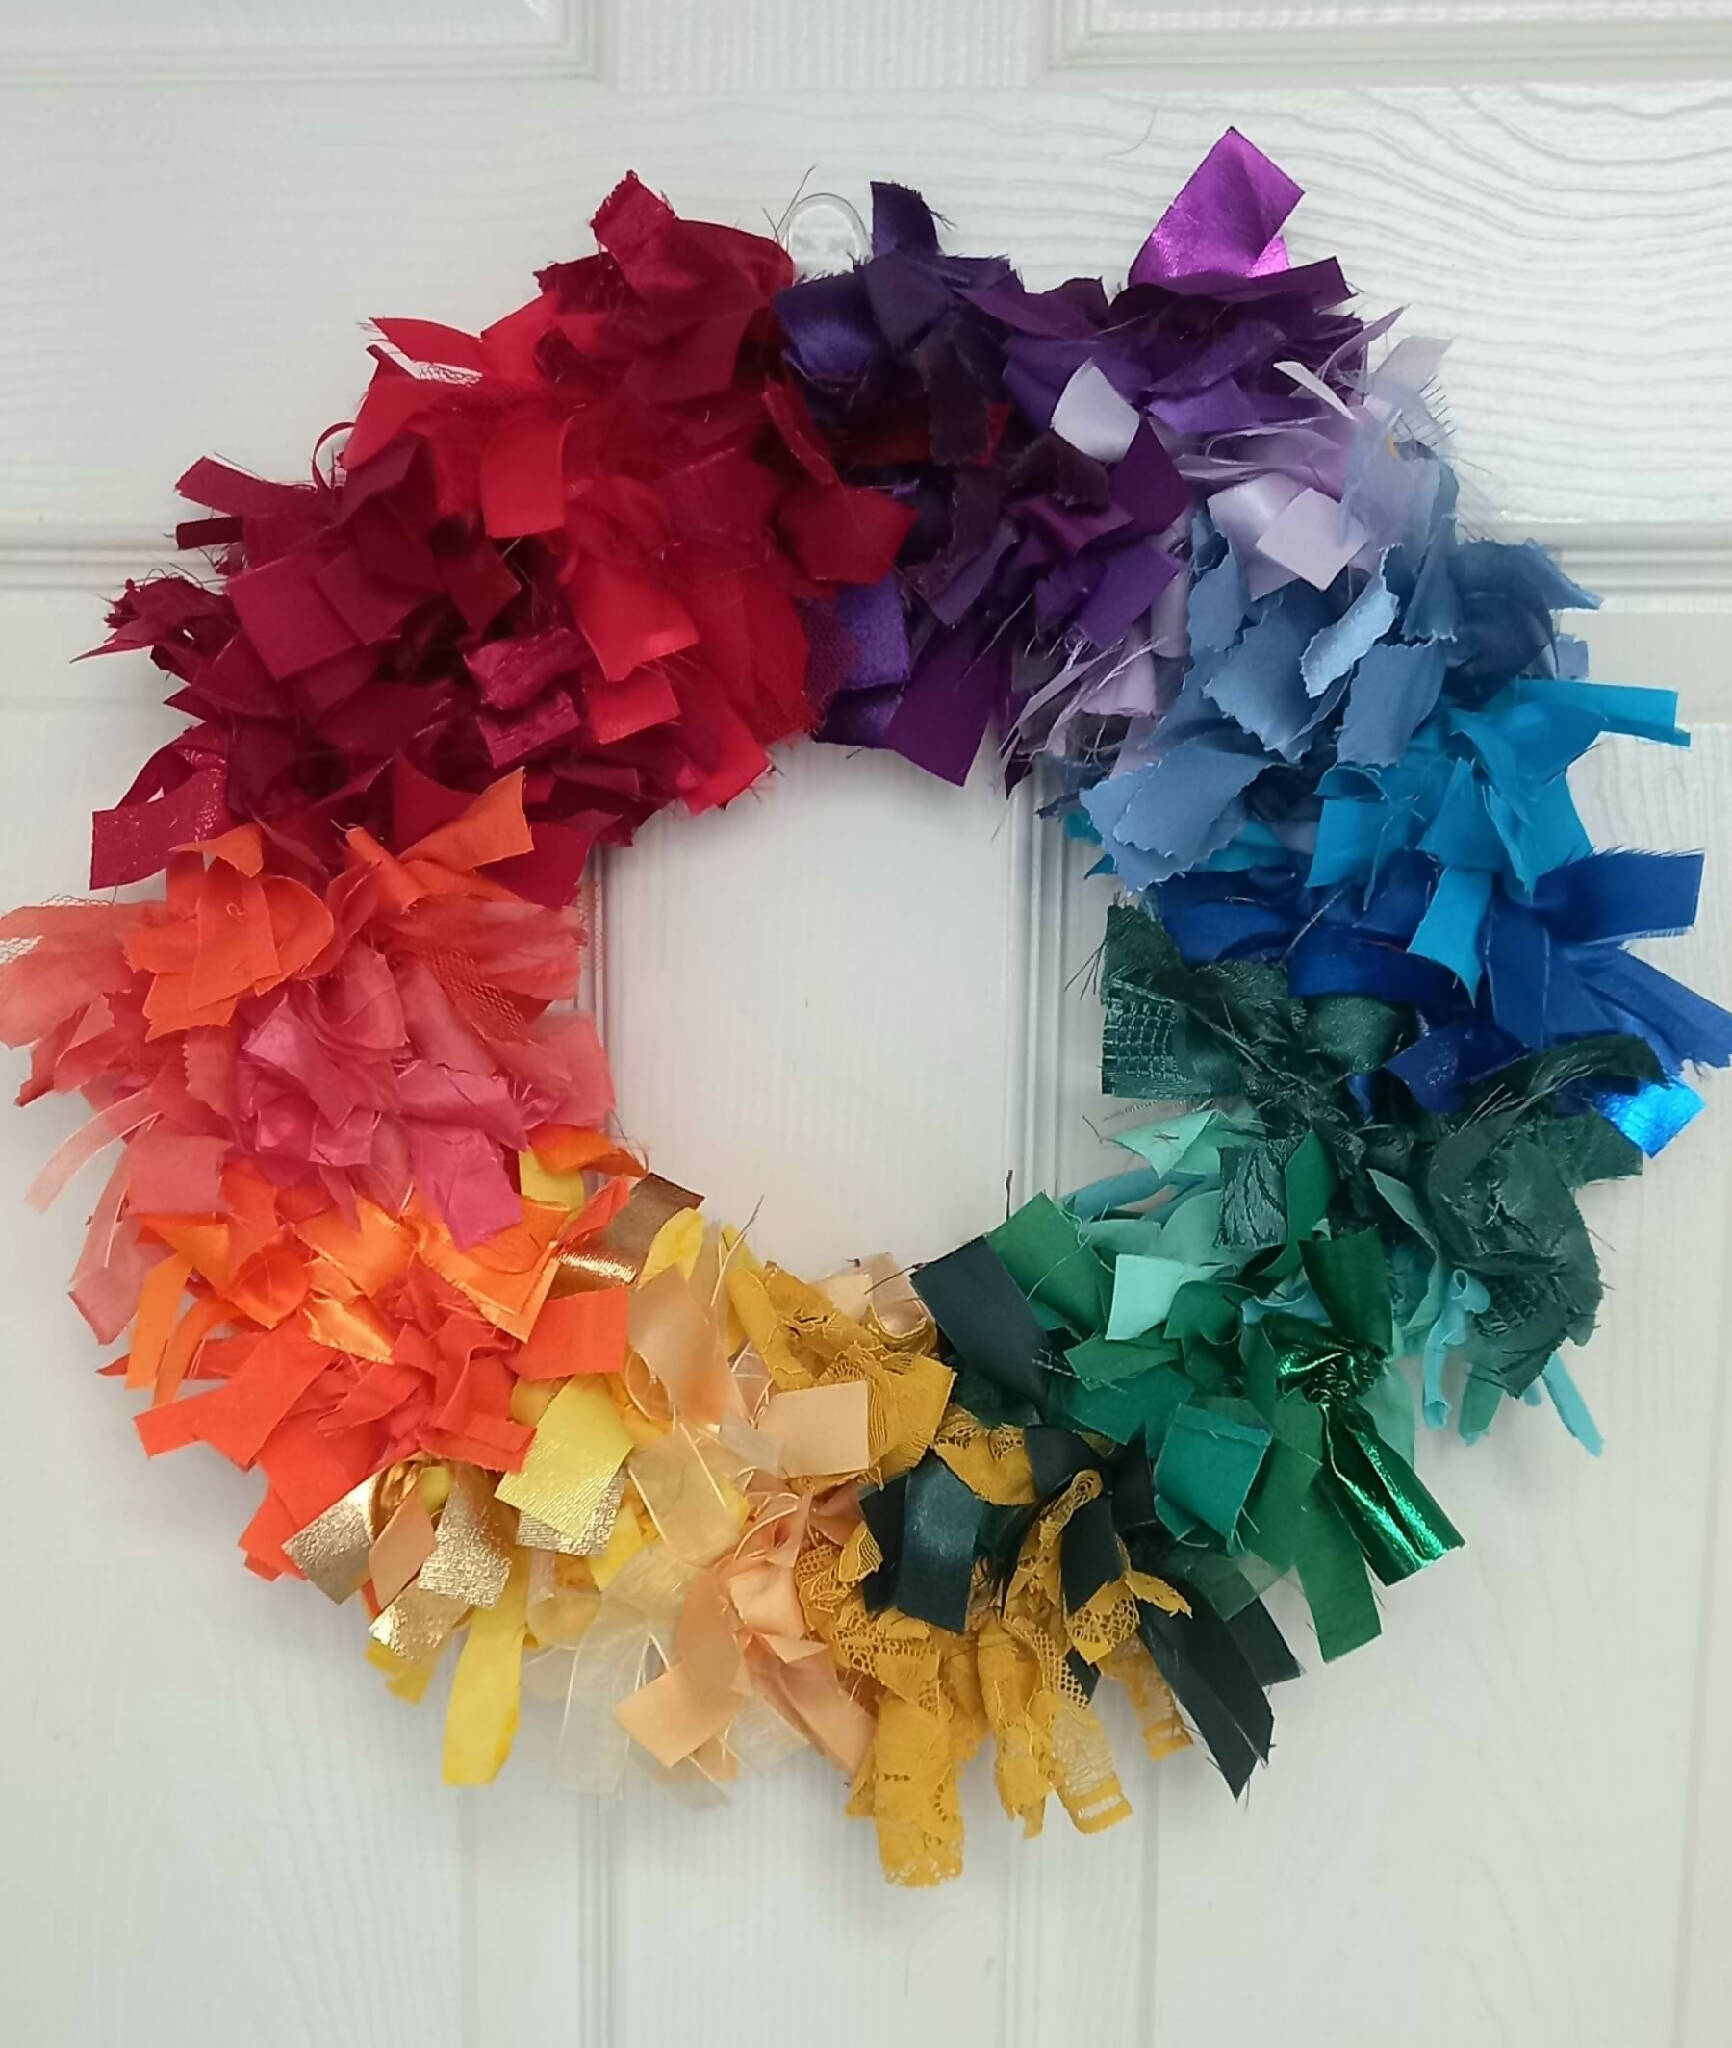 Rainbow Rag Wreath with Red Hanging Ribbon